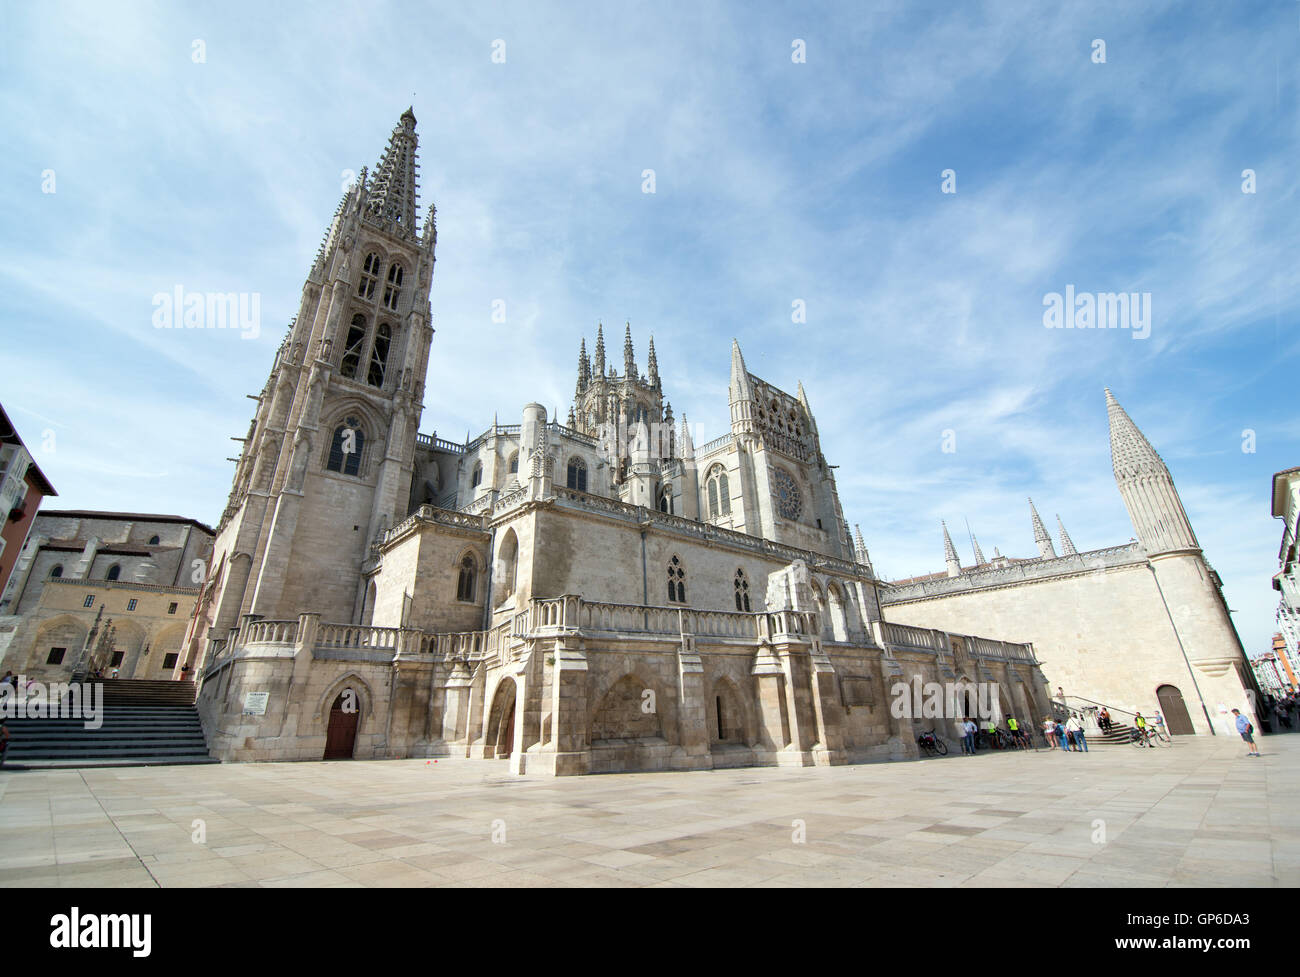 BURGOS, SPAIN - 31 AUGUST, 2016: Construction on Burgos' Gothic Cathedral began in 1221 and spanned mainly from the 13th to 15th Stock Photo